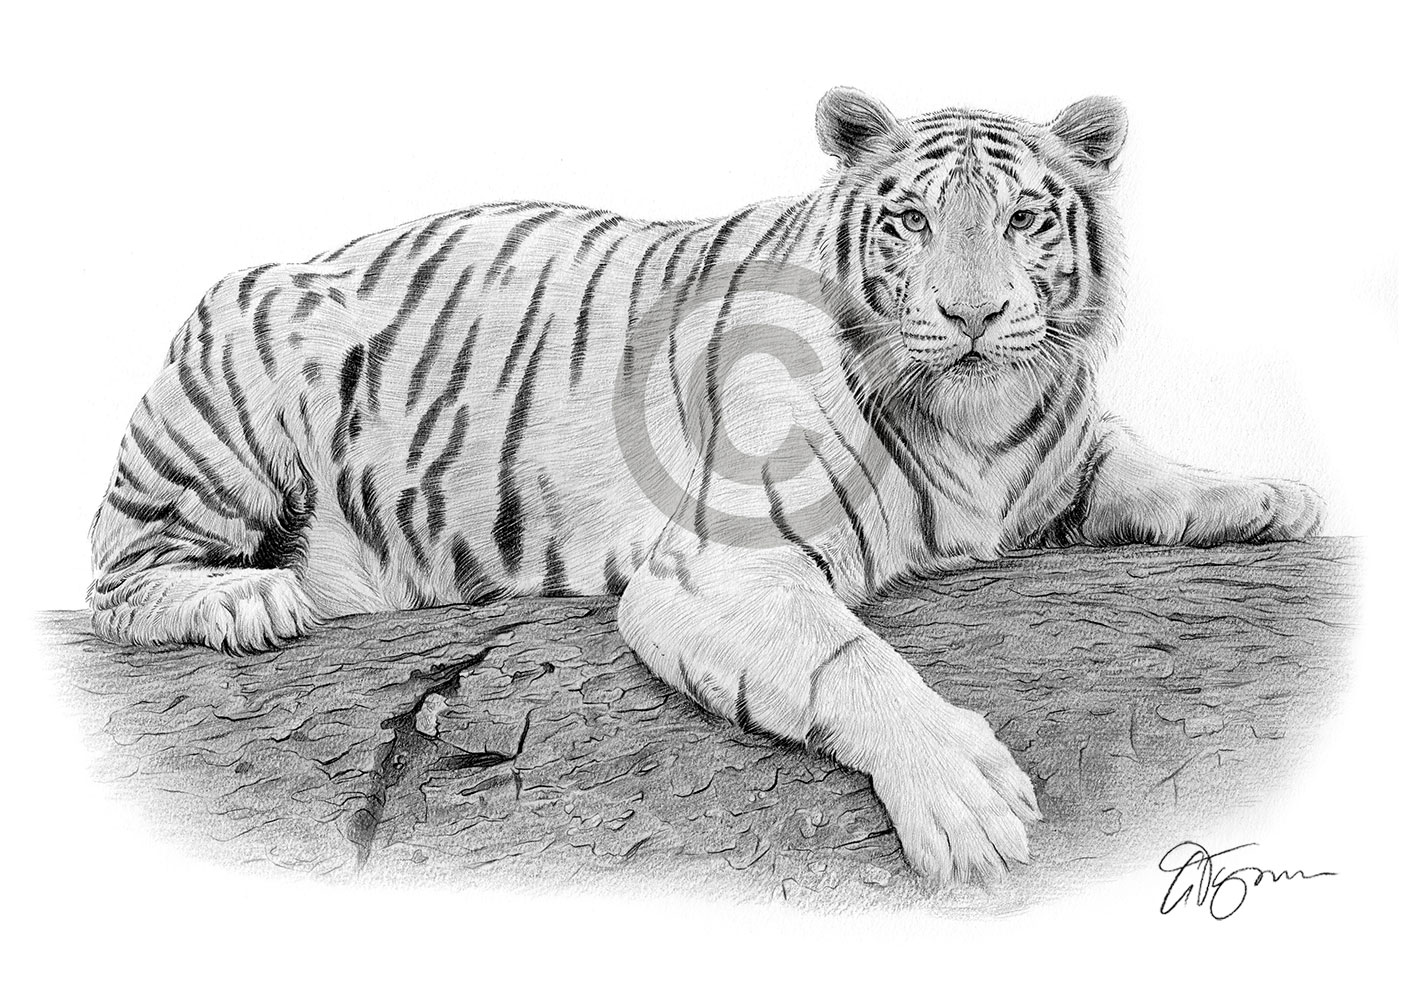 Pencil drawing of a white Bengal tiger by artist Gary Tymon